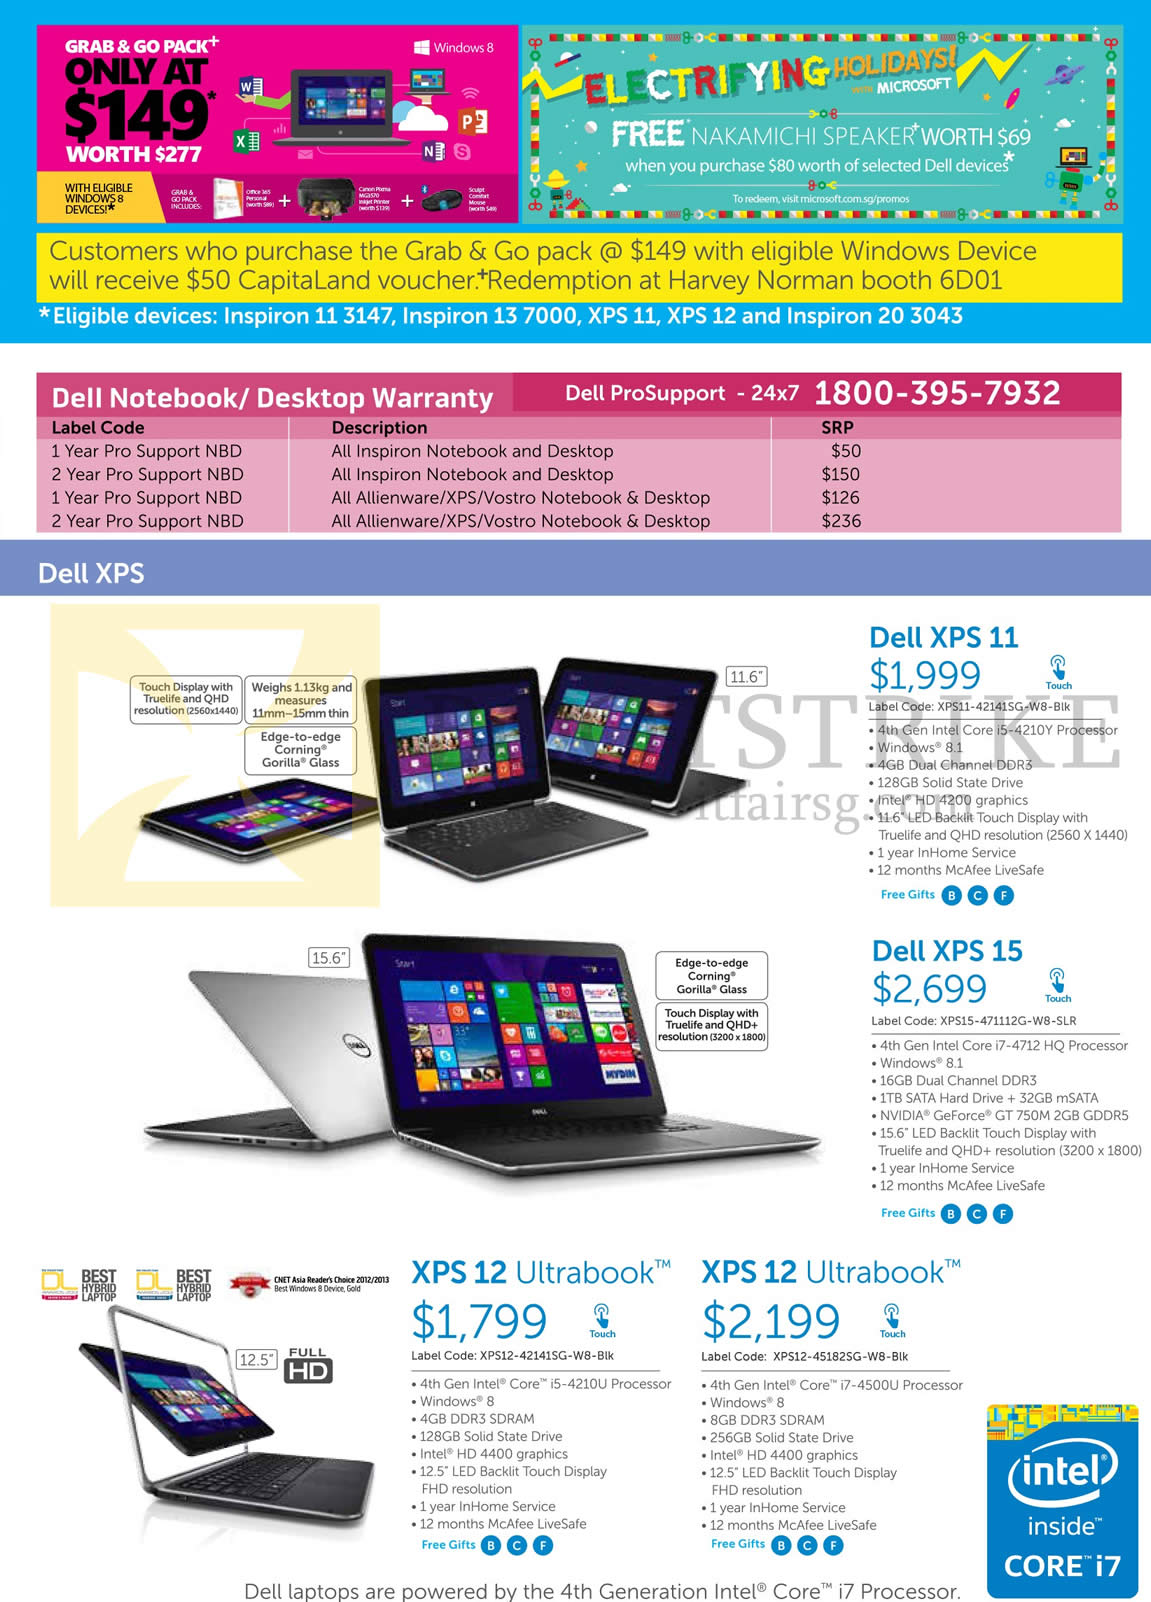 SITEX 2014 price list image brochure of Dell Notebooks XPS 11, XPS 15, XPS 12